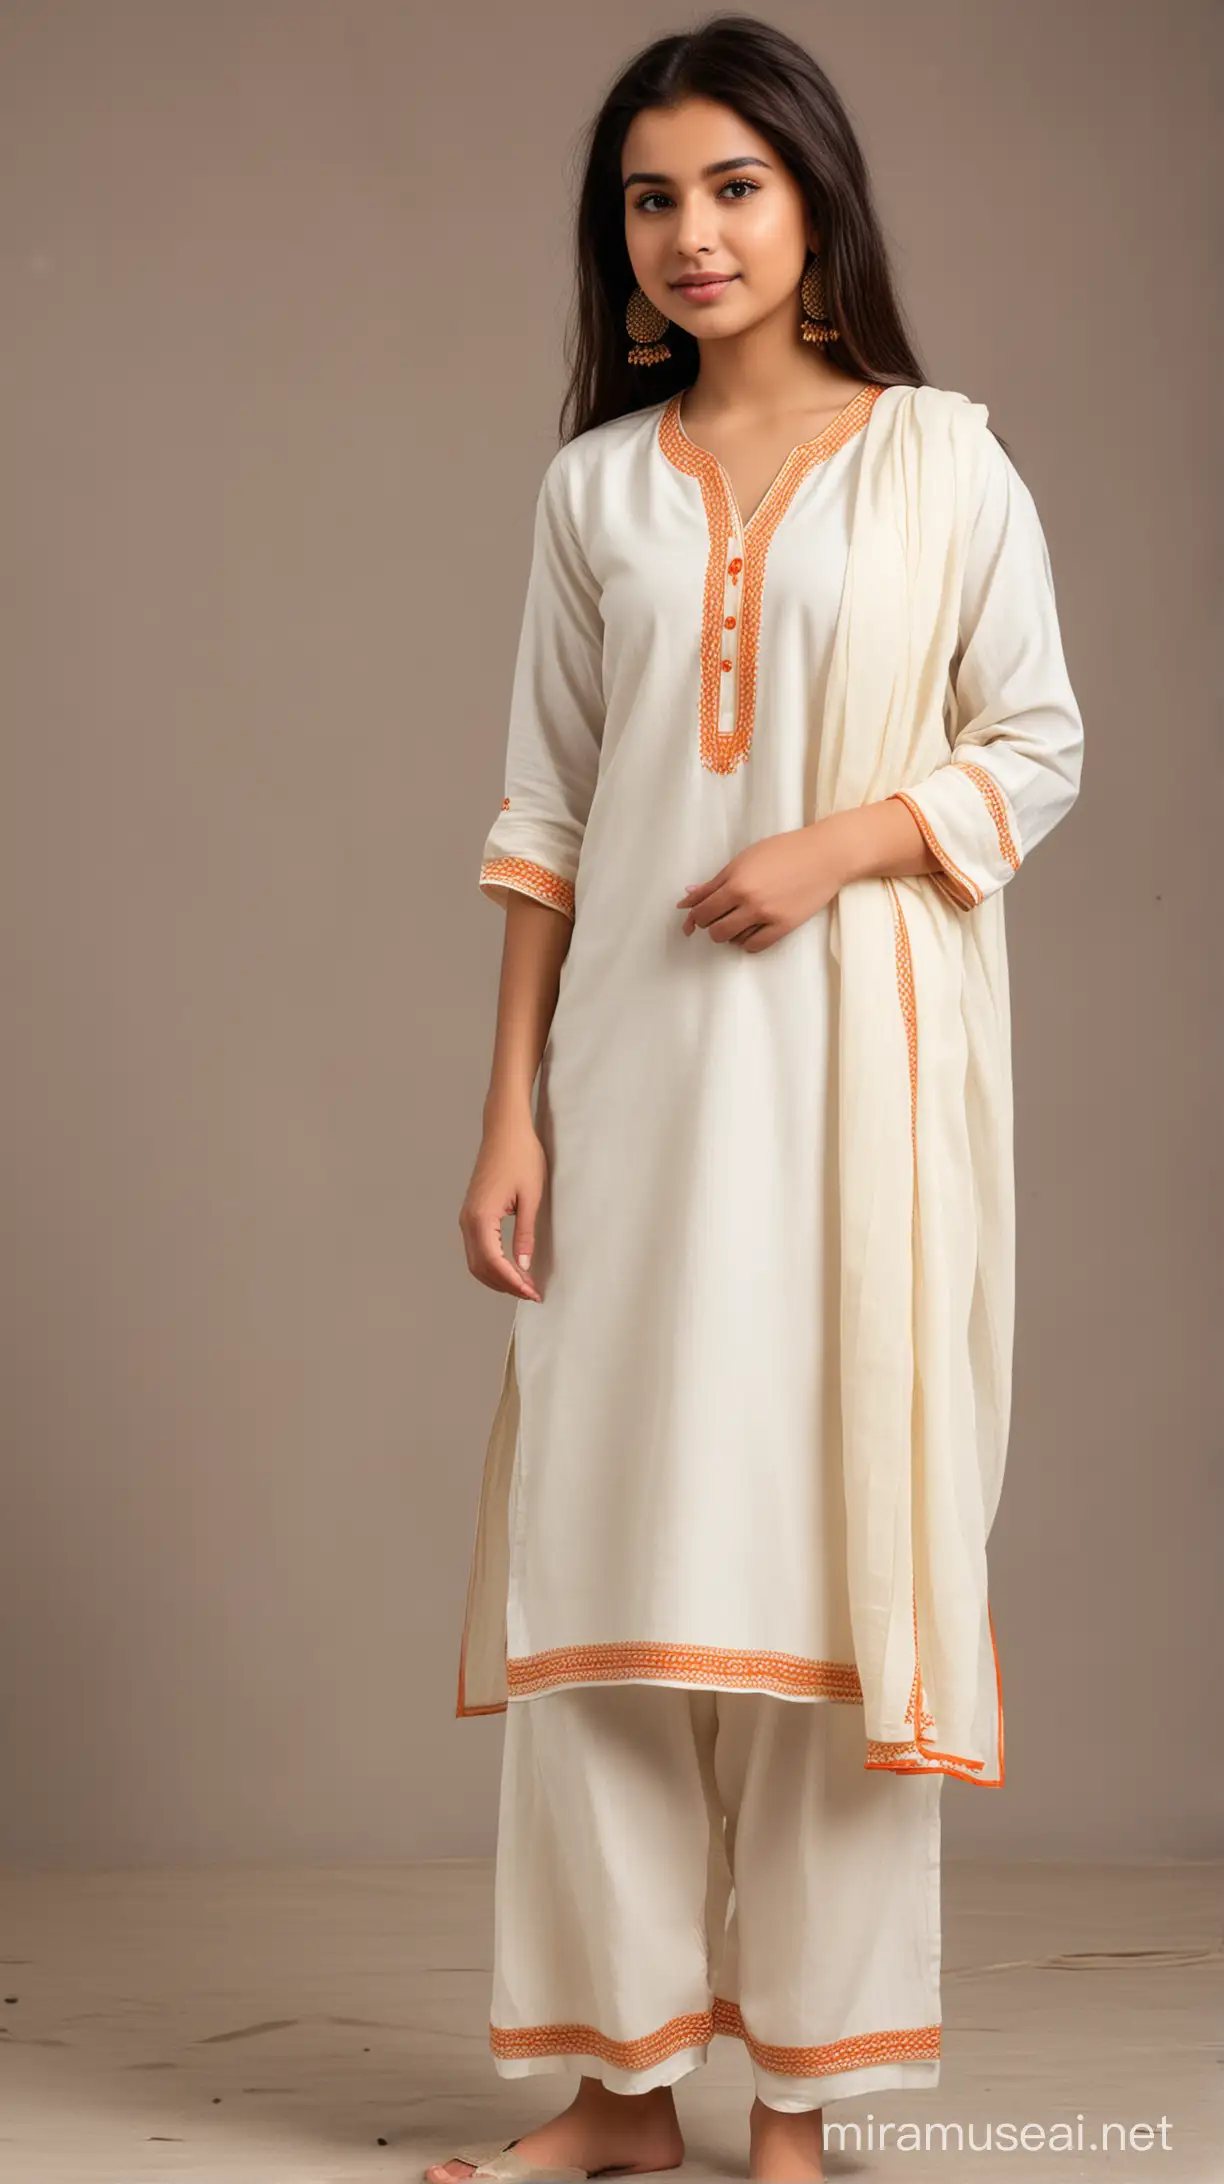 A young girl standing in a slight side pose wearing a basic v-neck off-white kameez with an off-white shalwar and off-white dupatta with orange piping on dupatta edges. Full picture. Dark brown hair.